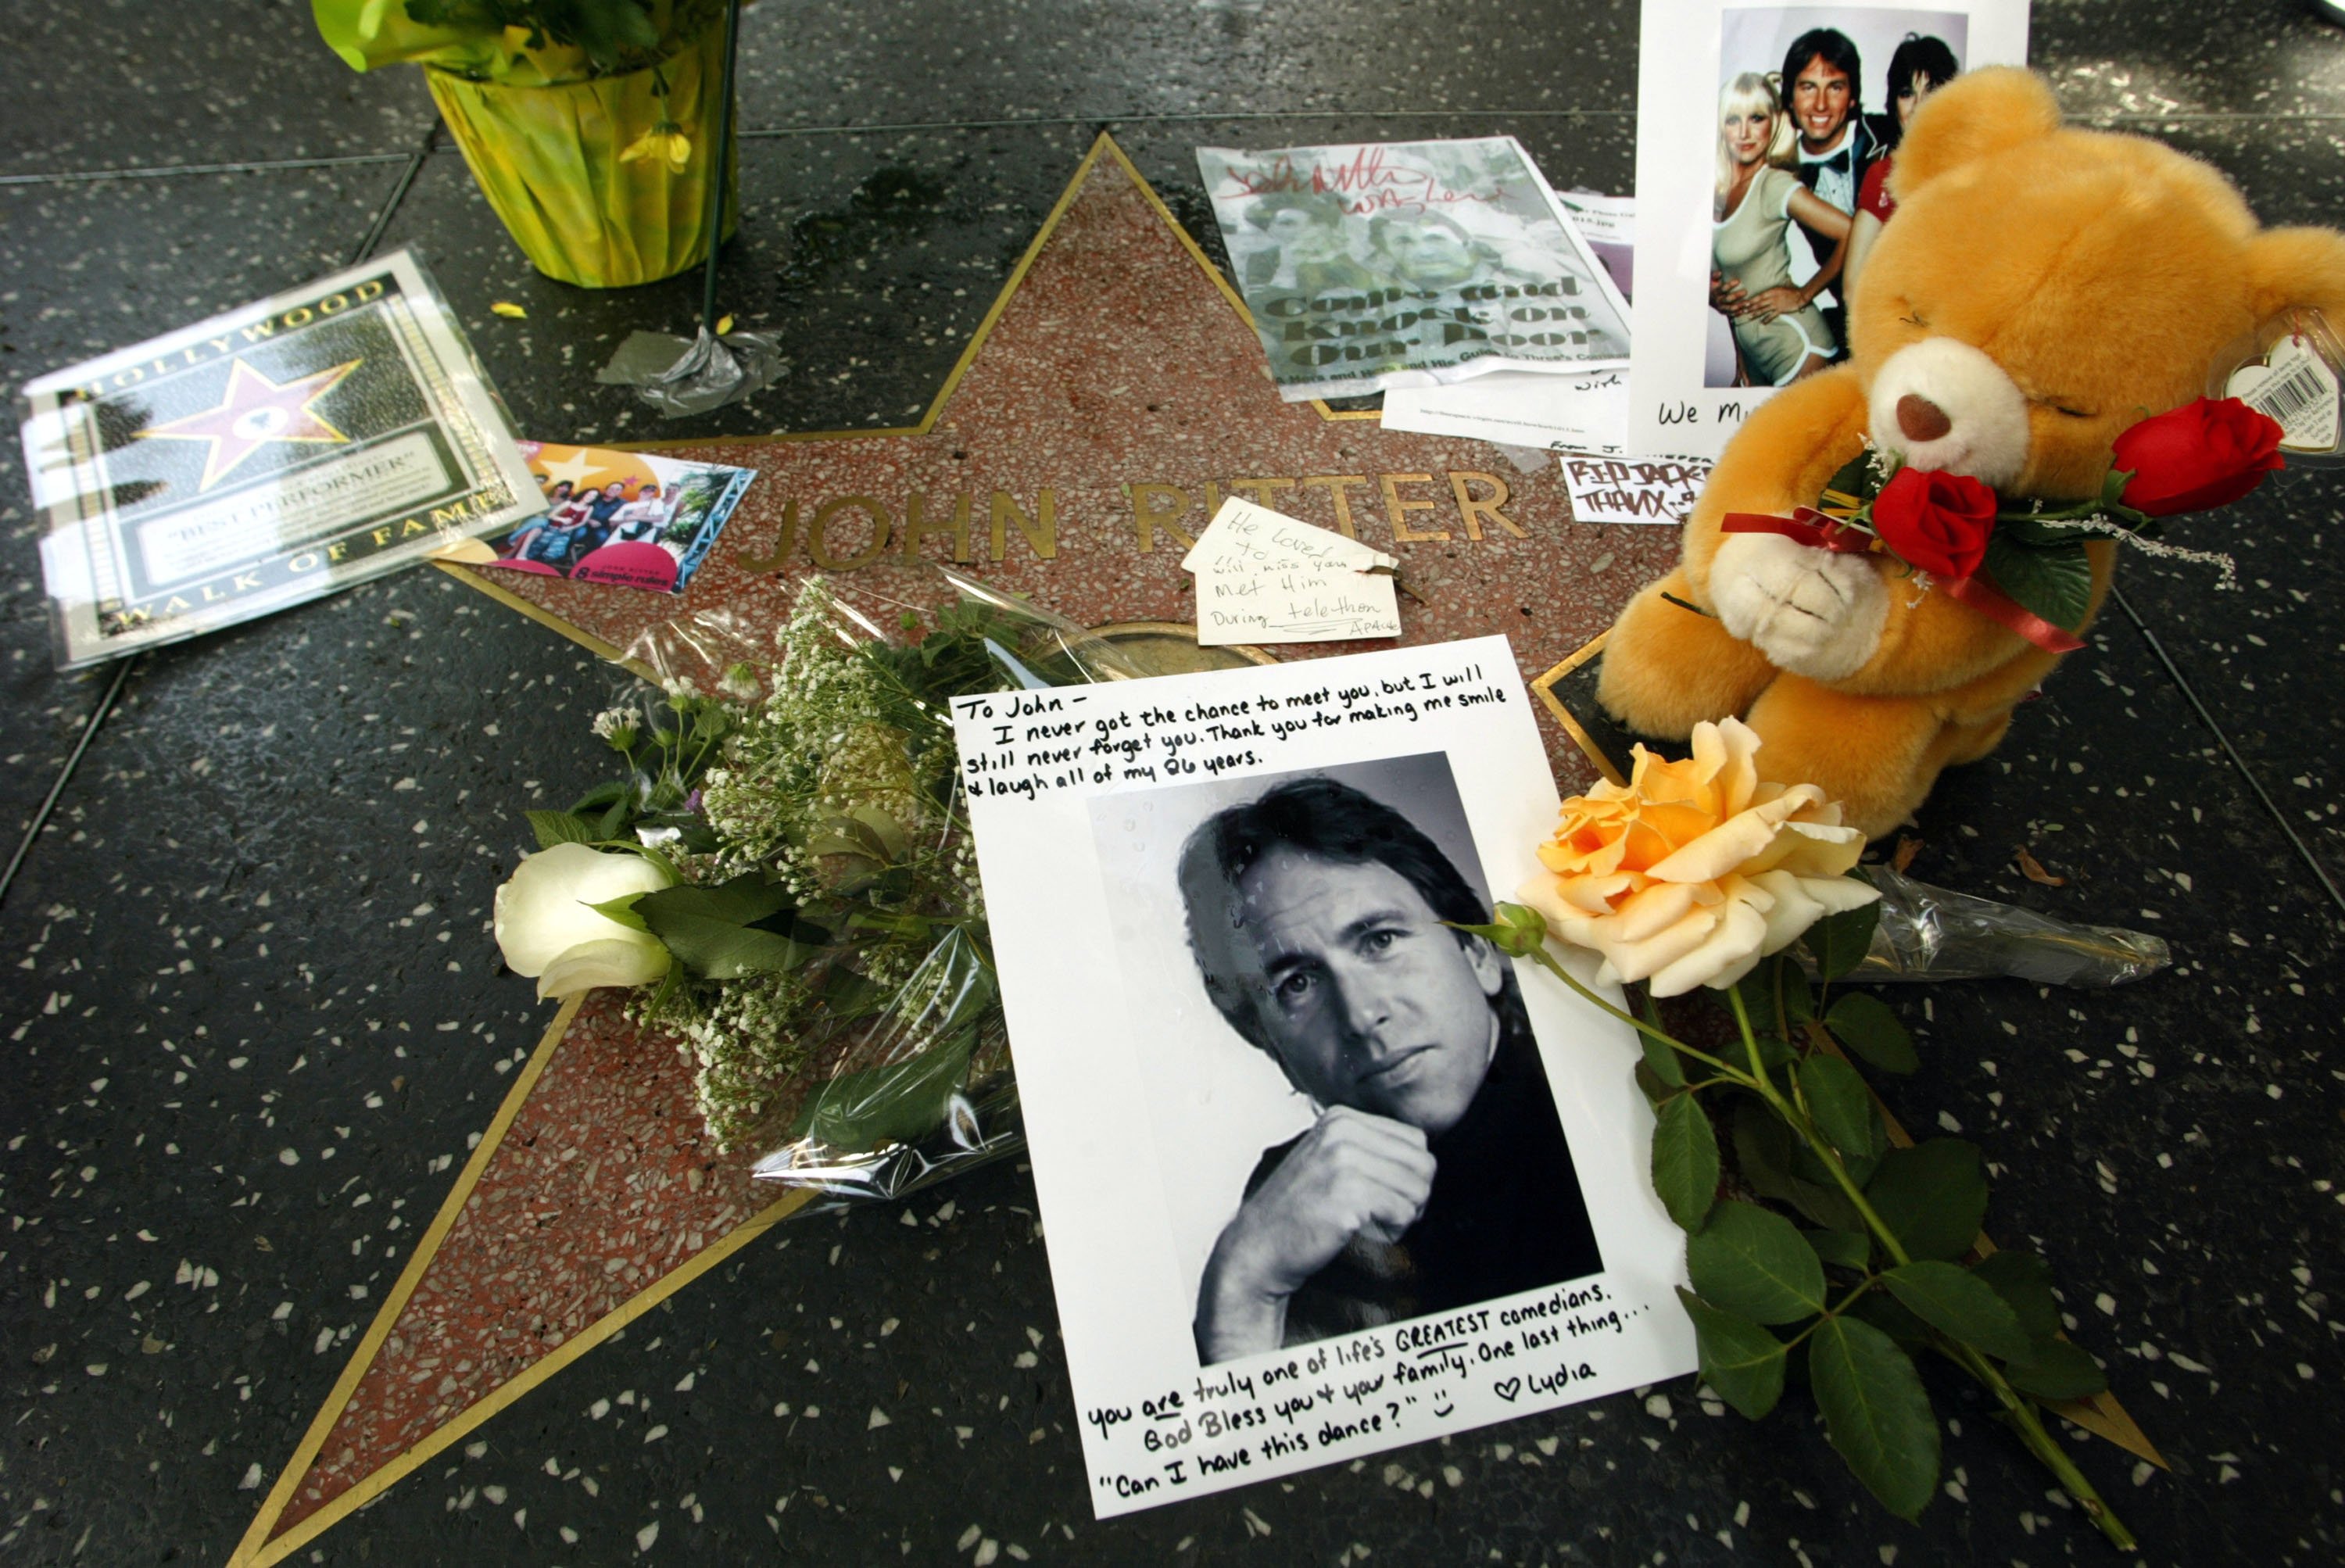 John Ritter's Star on the Hollywood Walk of Fame Memorialized with Flowers and Gifts by Fans after his death on September 11, 2003 | Source: Getty Images